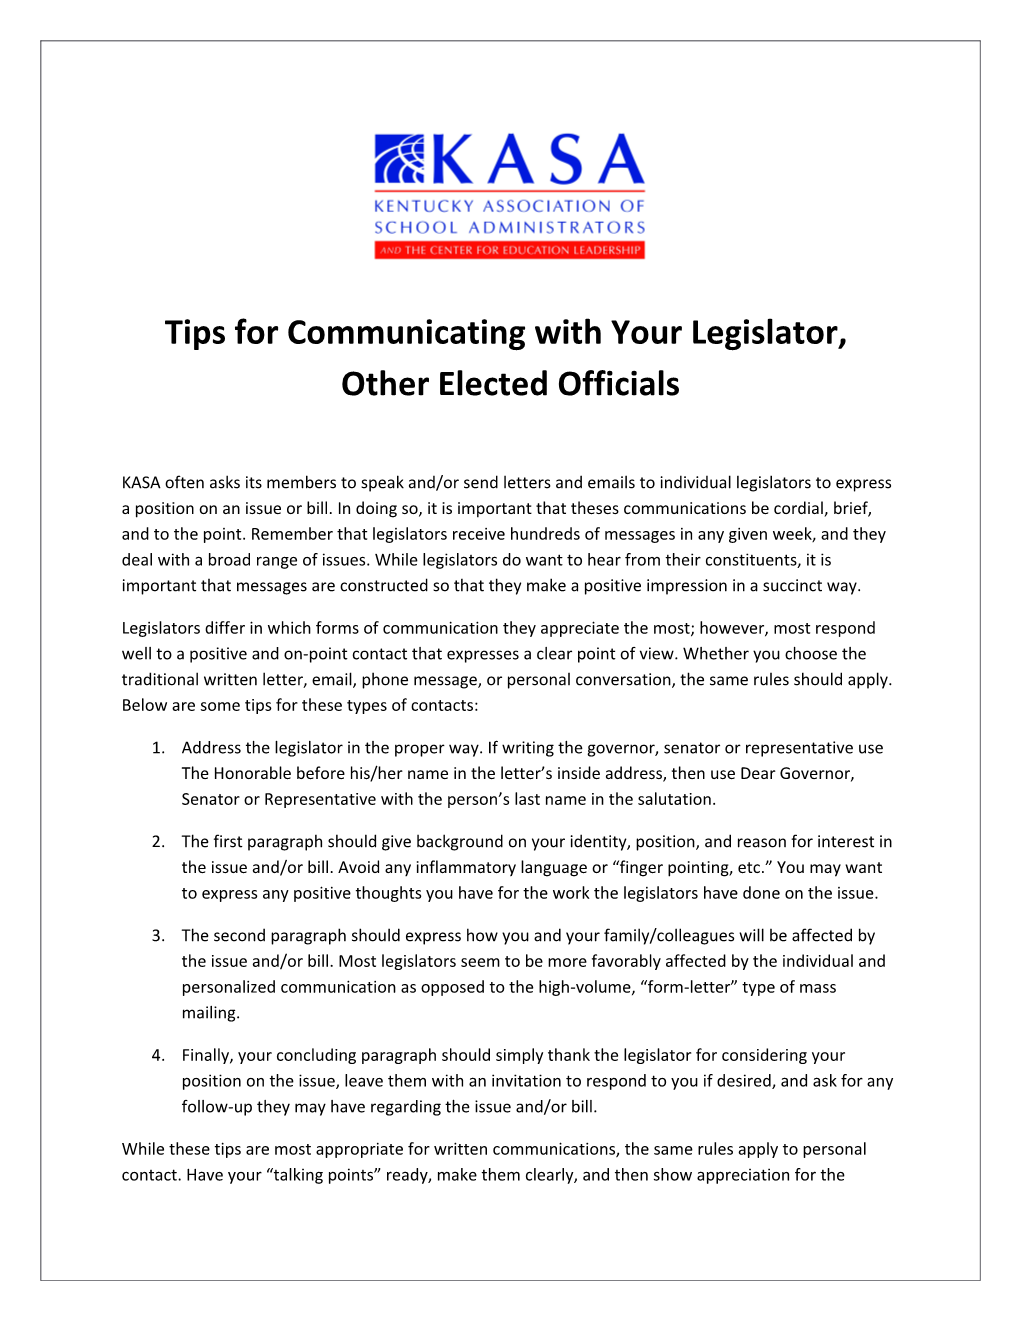 Tips for Communicating with Your Legislator, Other Elected Officials